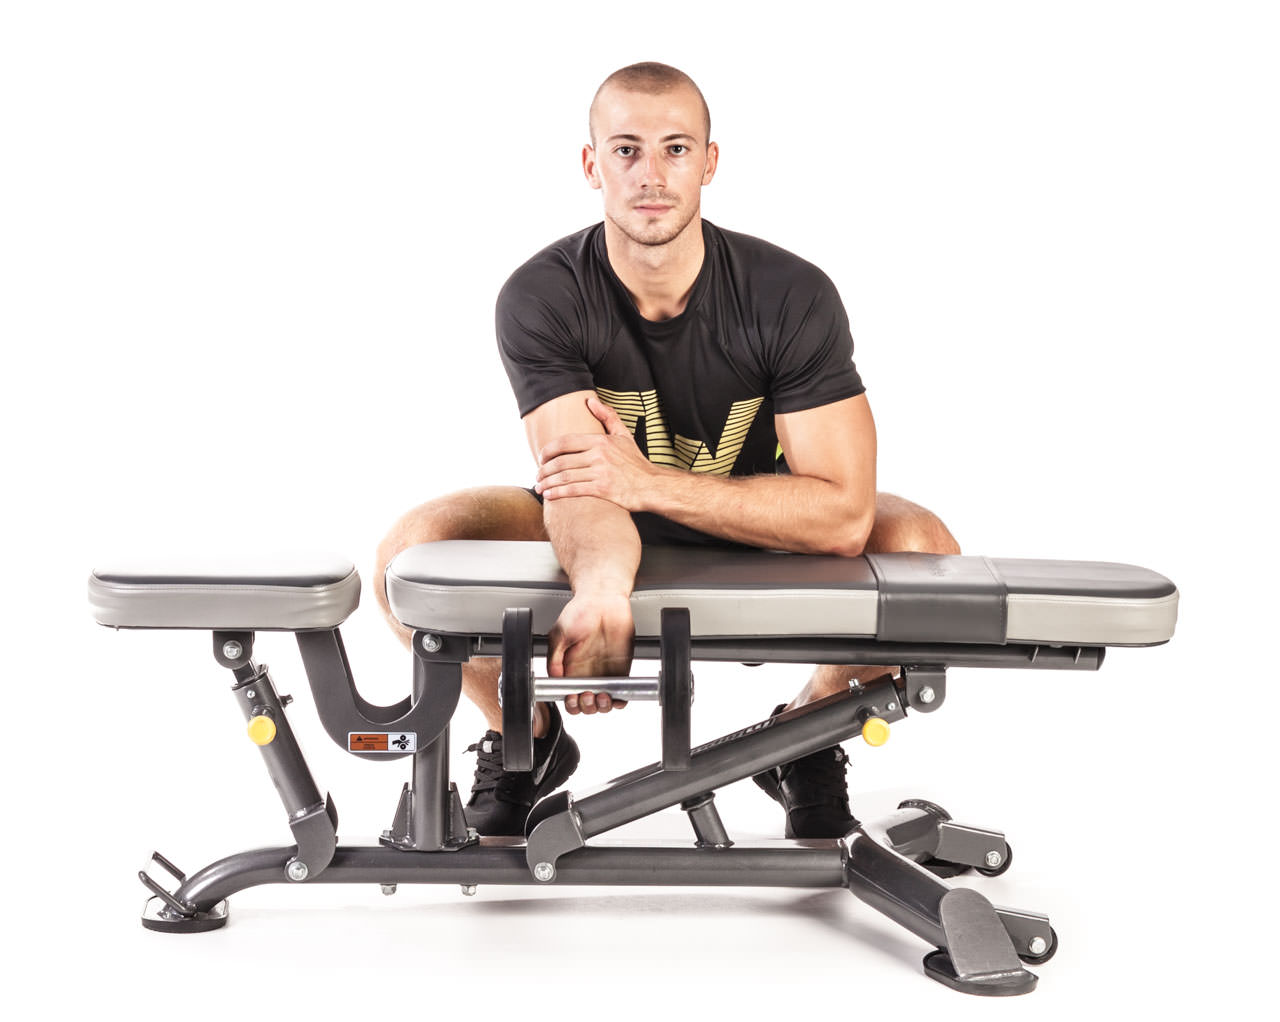 One-Arm Dumbbell Wrist Curl Over a Bench frame #1